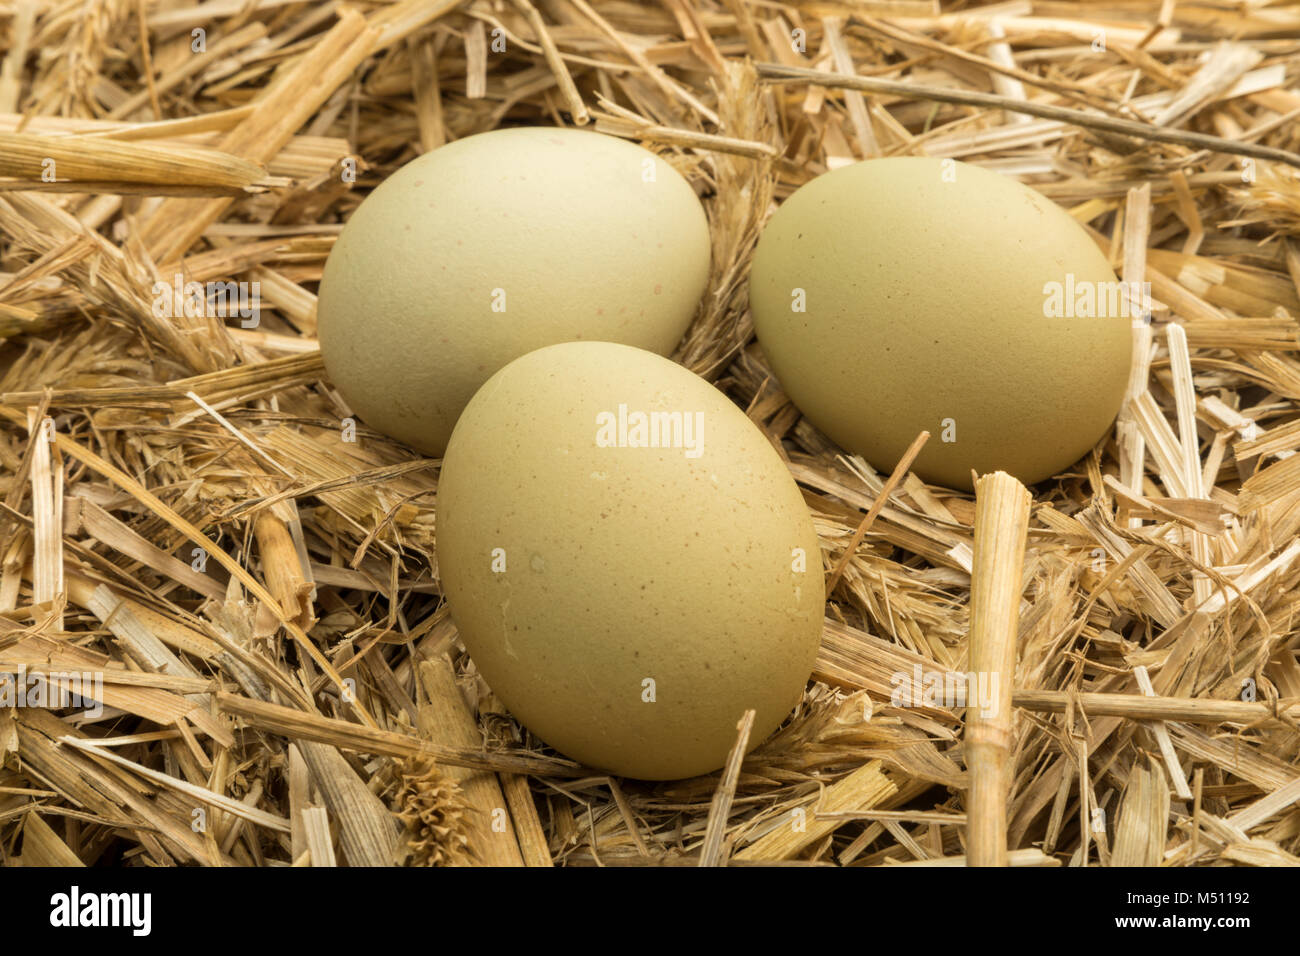 Green eggs from Araucana chicken breed on straw in chicken coop Stock Photo